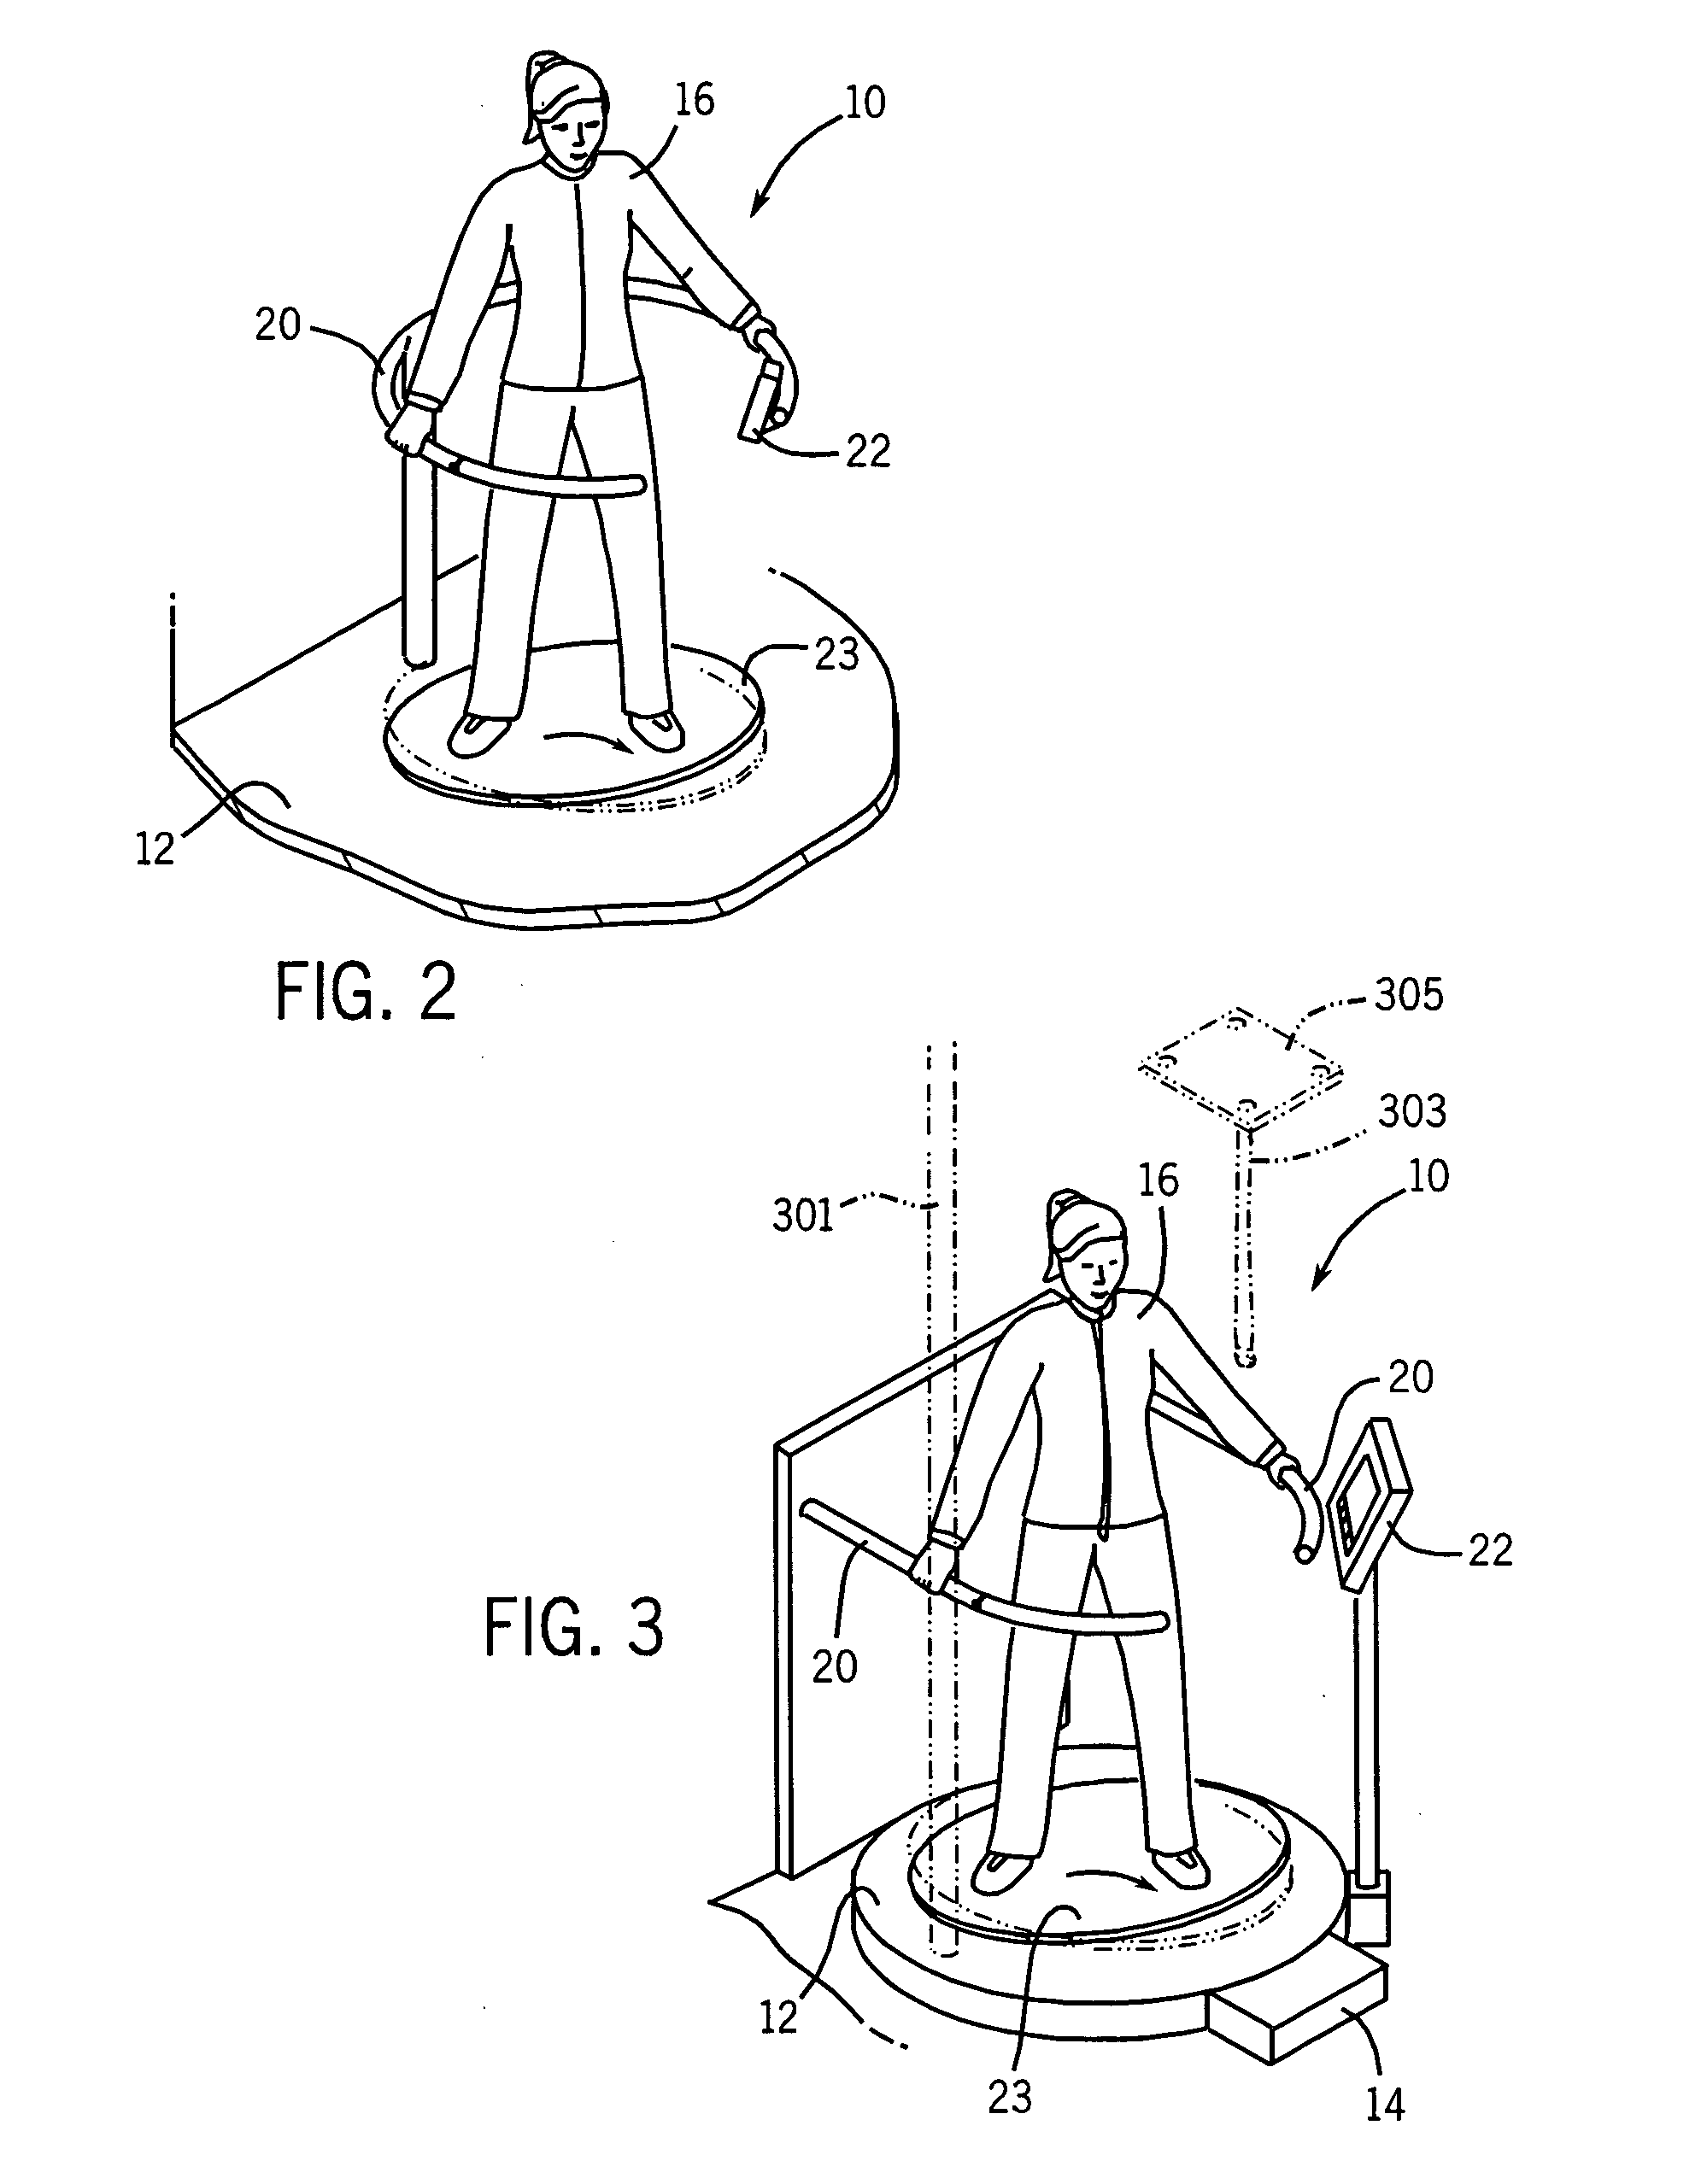 Exercise device having a movable platform